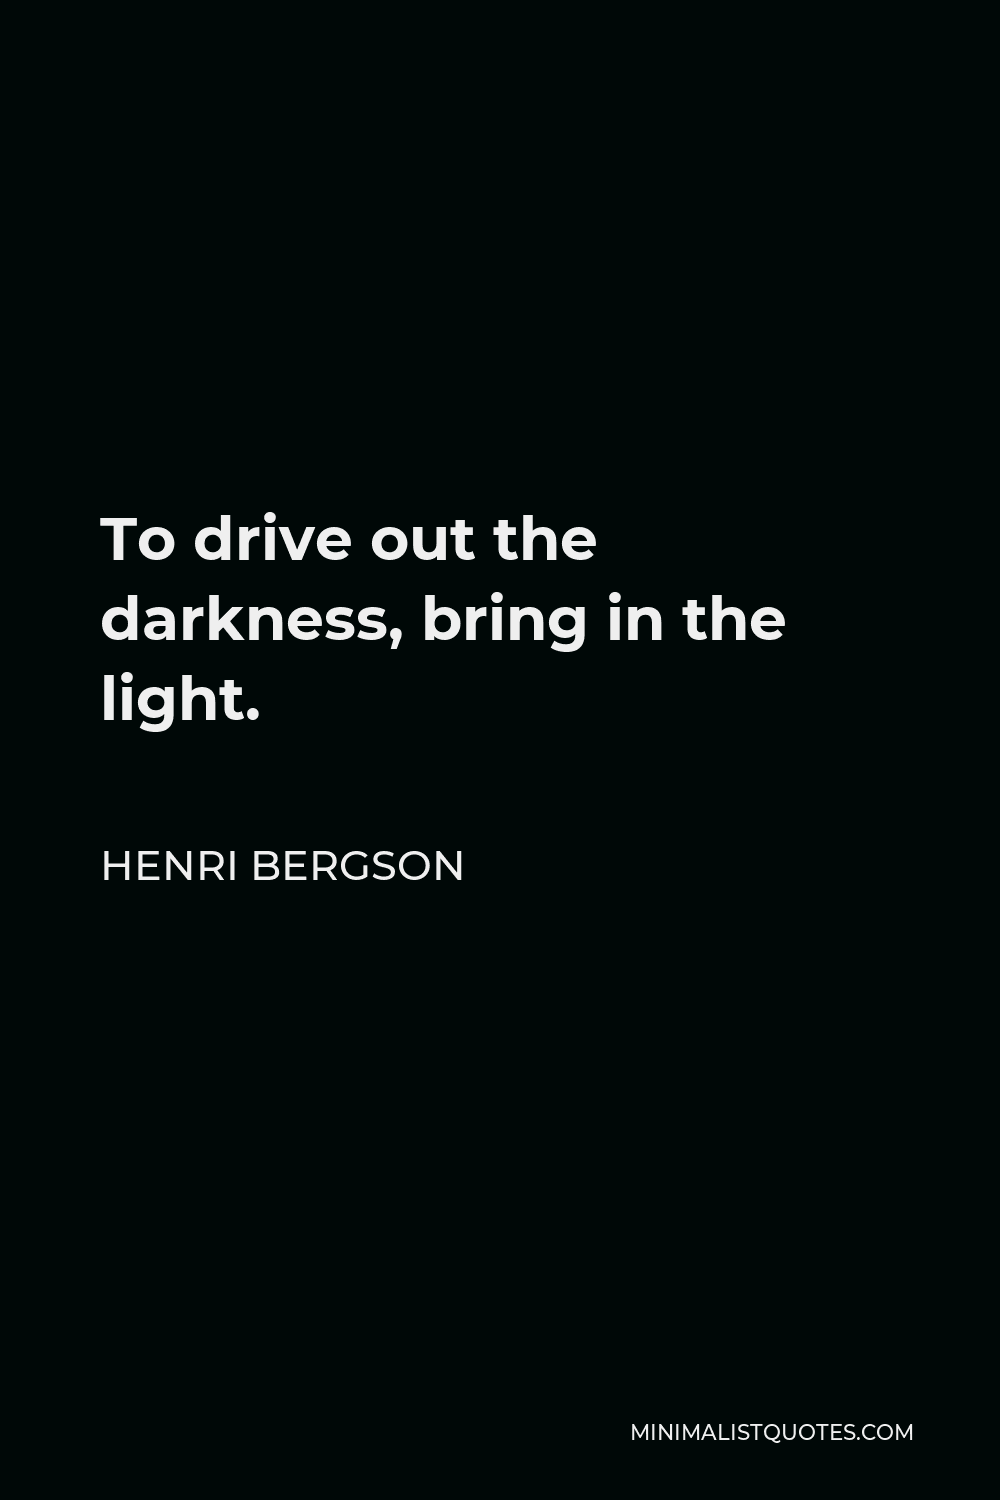 Henri Bergson Quote - To drive out the darkness, bring in the light.